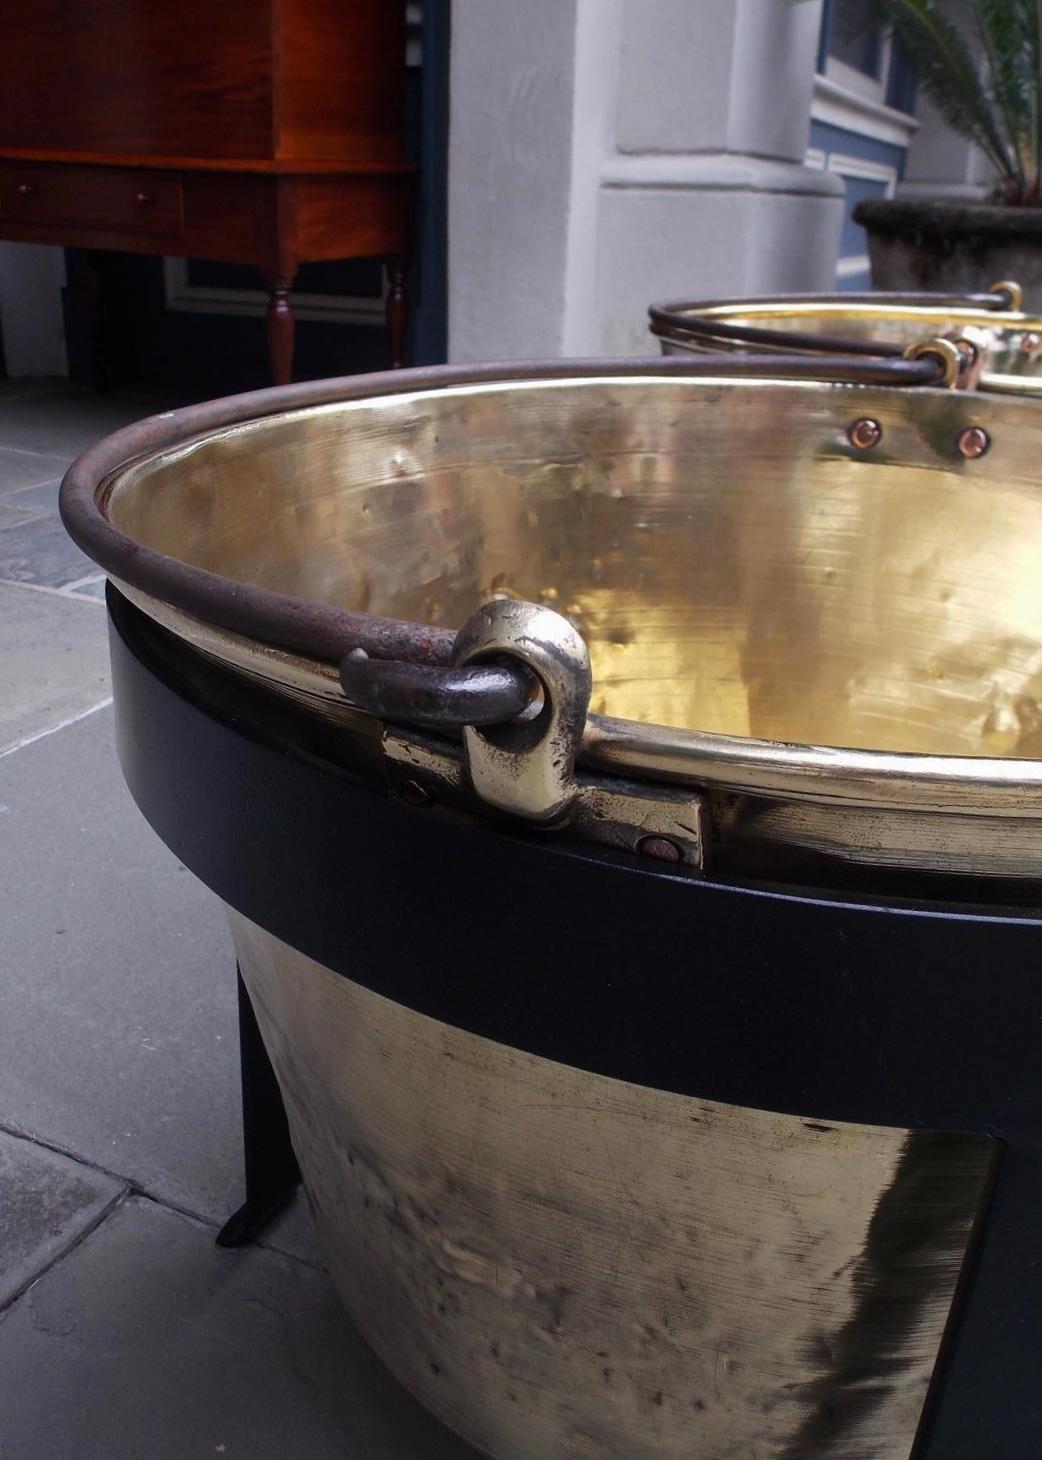 Pair of American Brass & Wrought Iron Plantation Cauldrons on Stand CT, C. 1851 For Sale 3